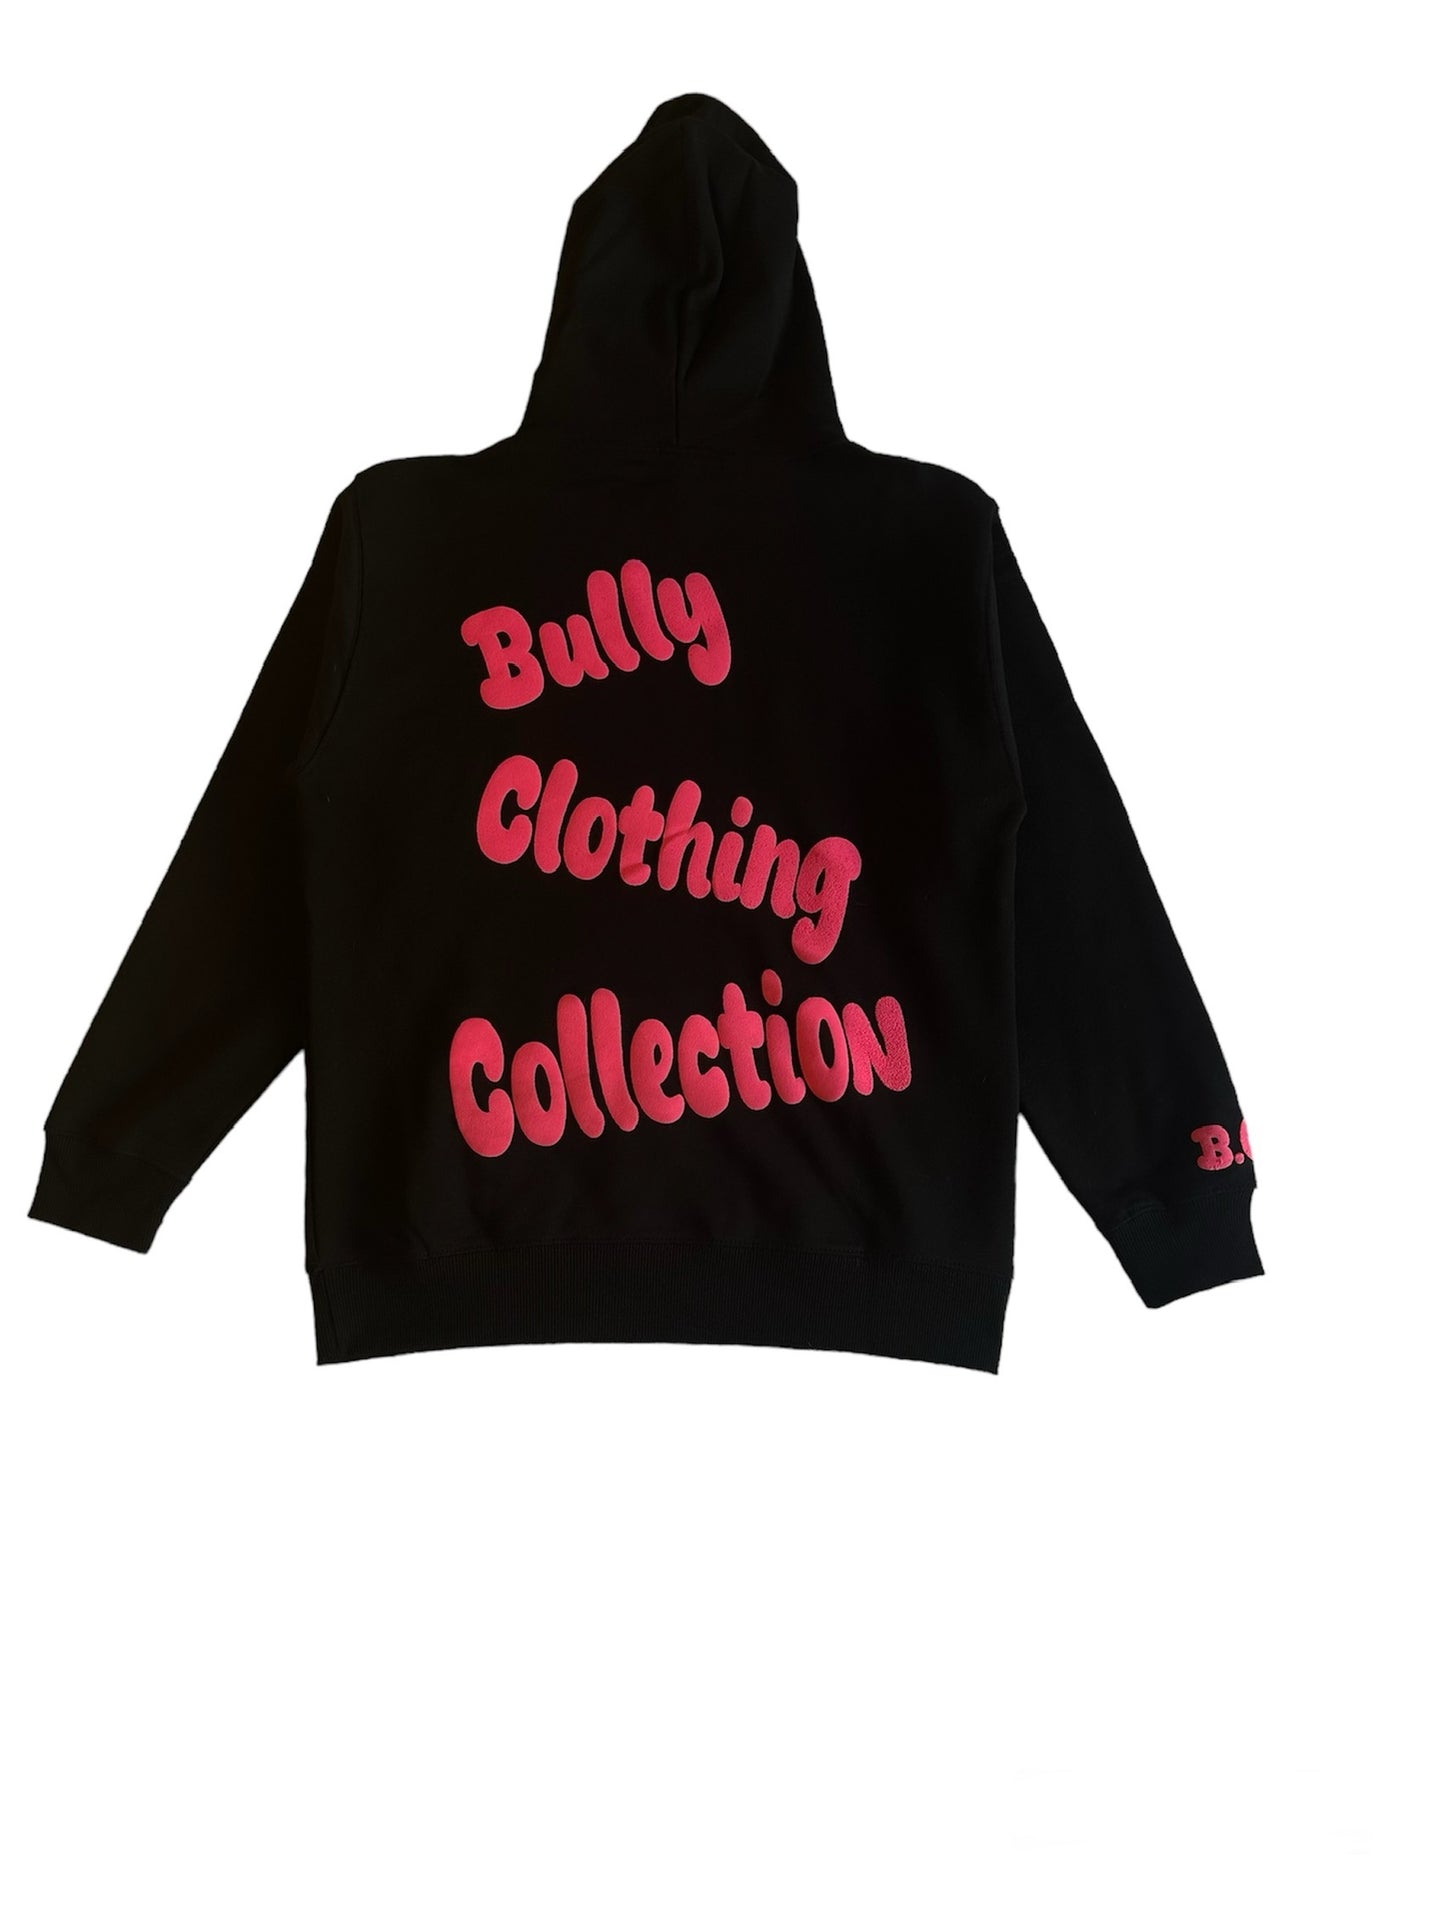 Black and Hot Pink Hoodie Stacked Sweatsuit